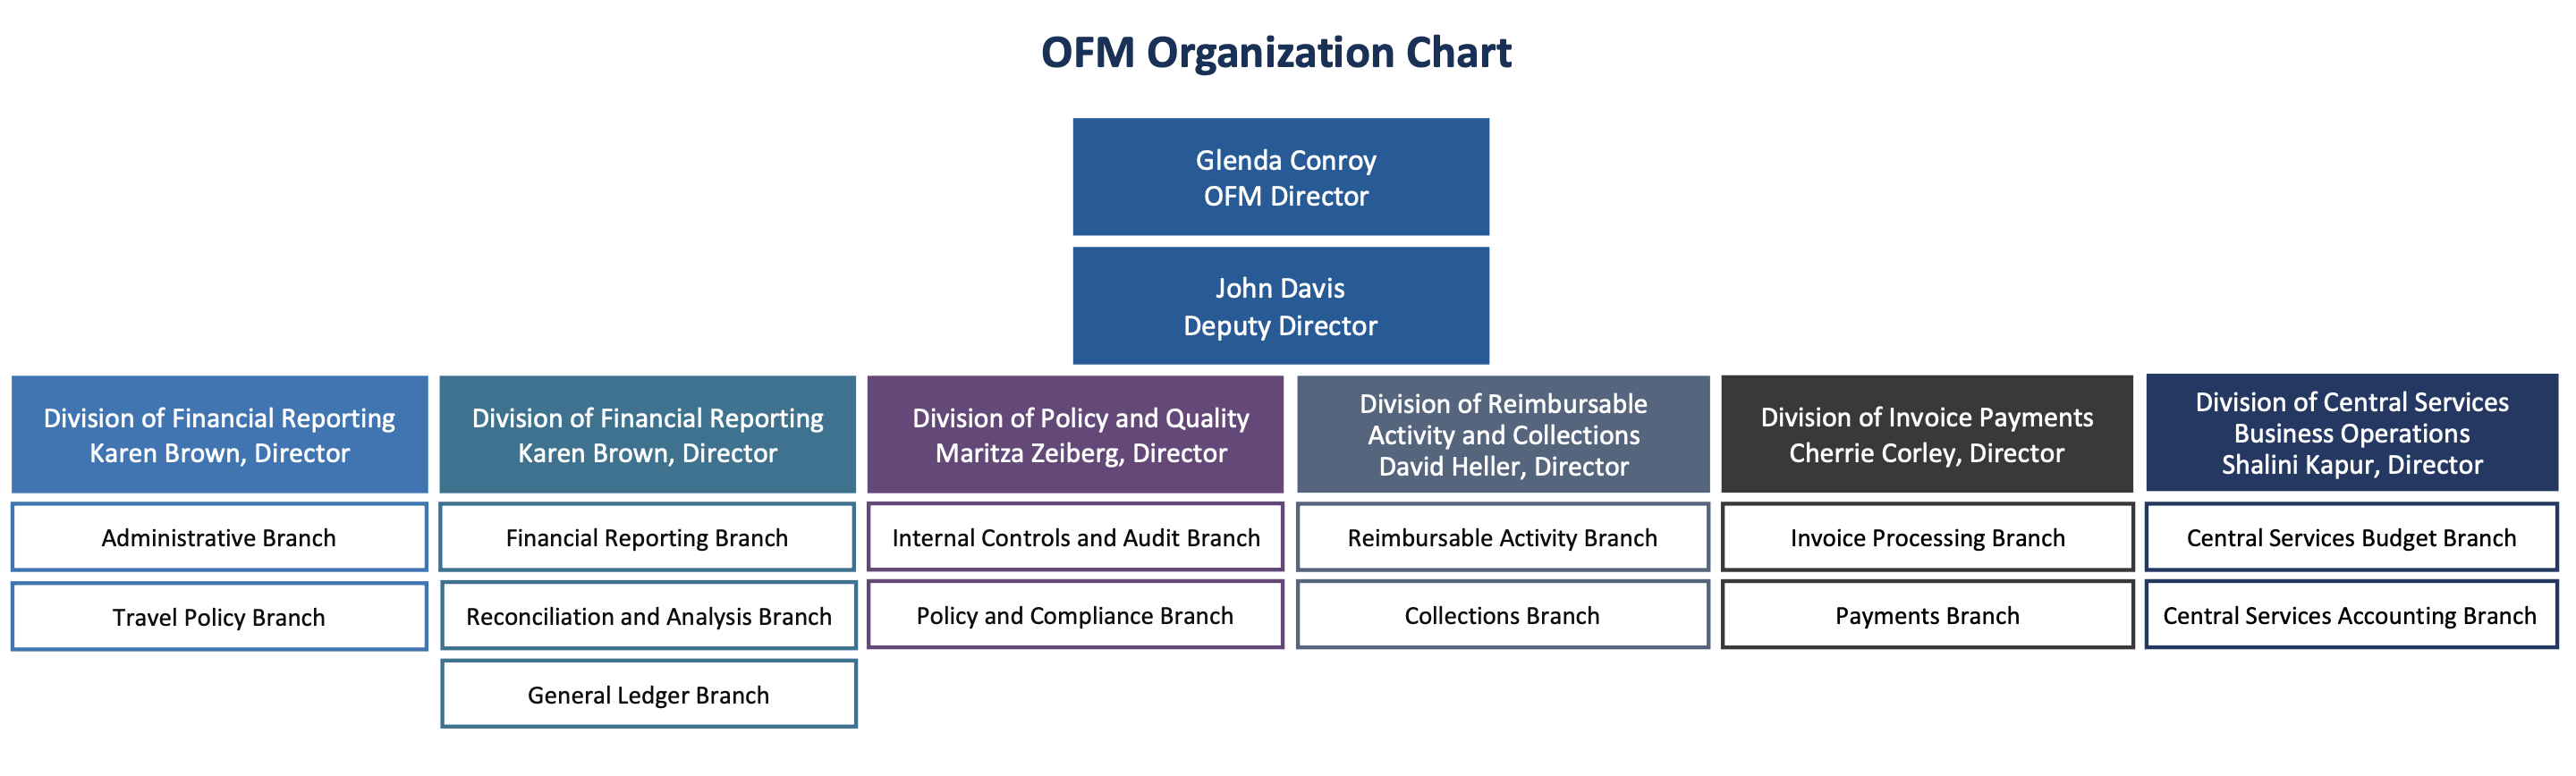 Organization chart for the Office of Financial Management.